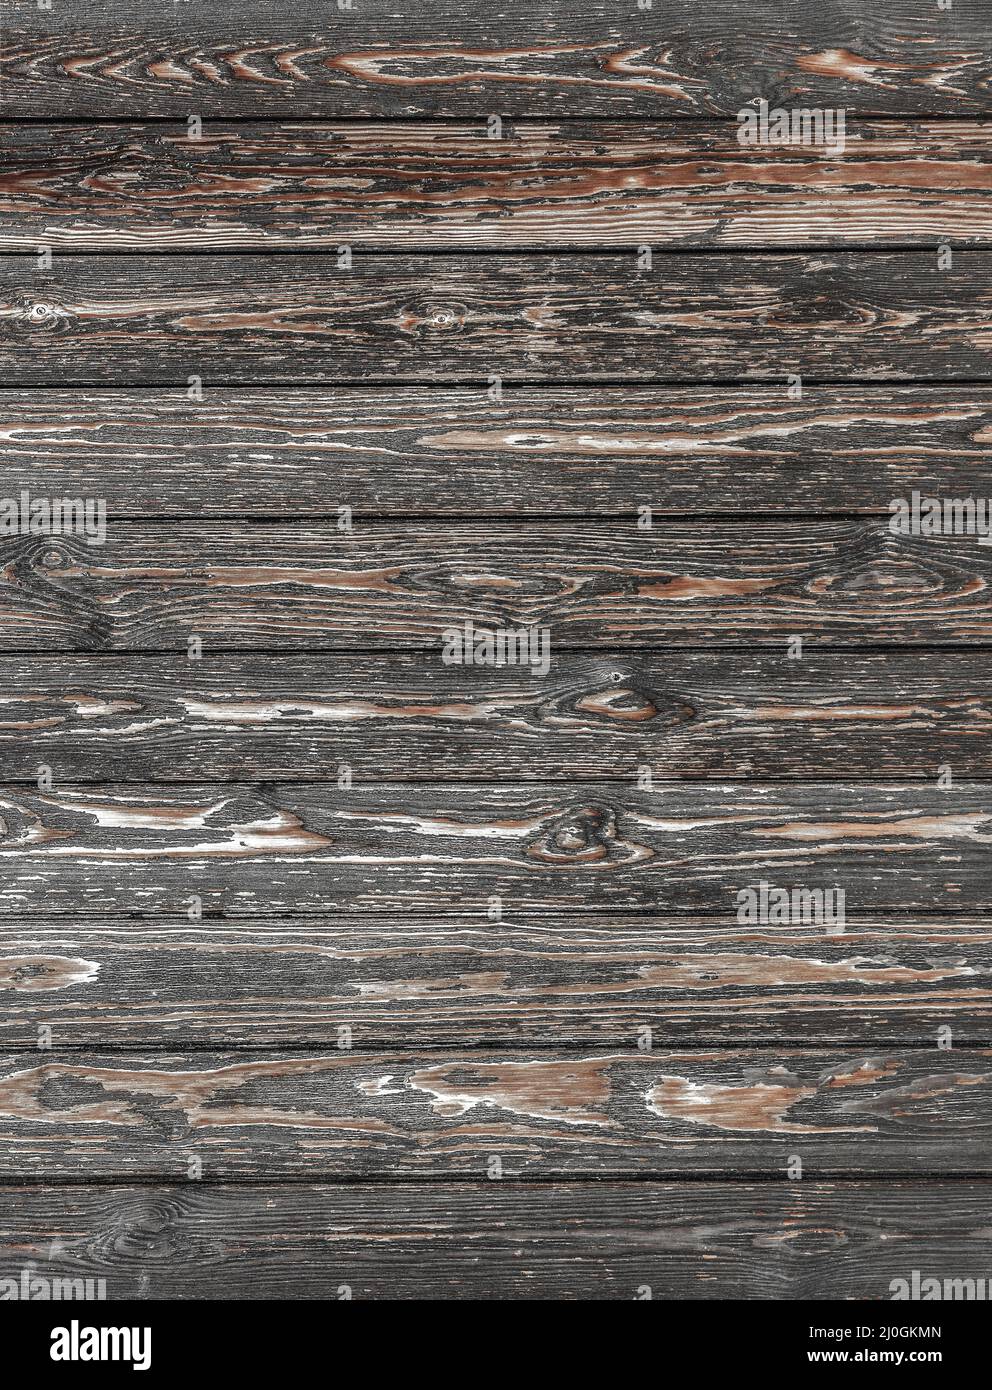 Wooden background Stock Photo